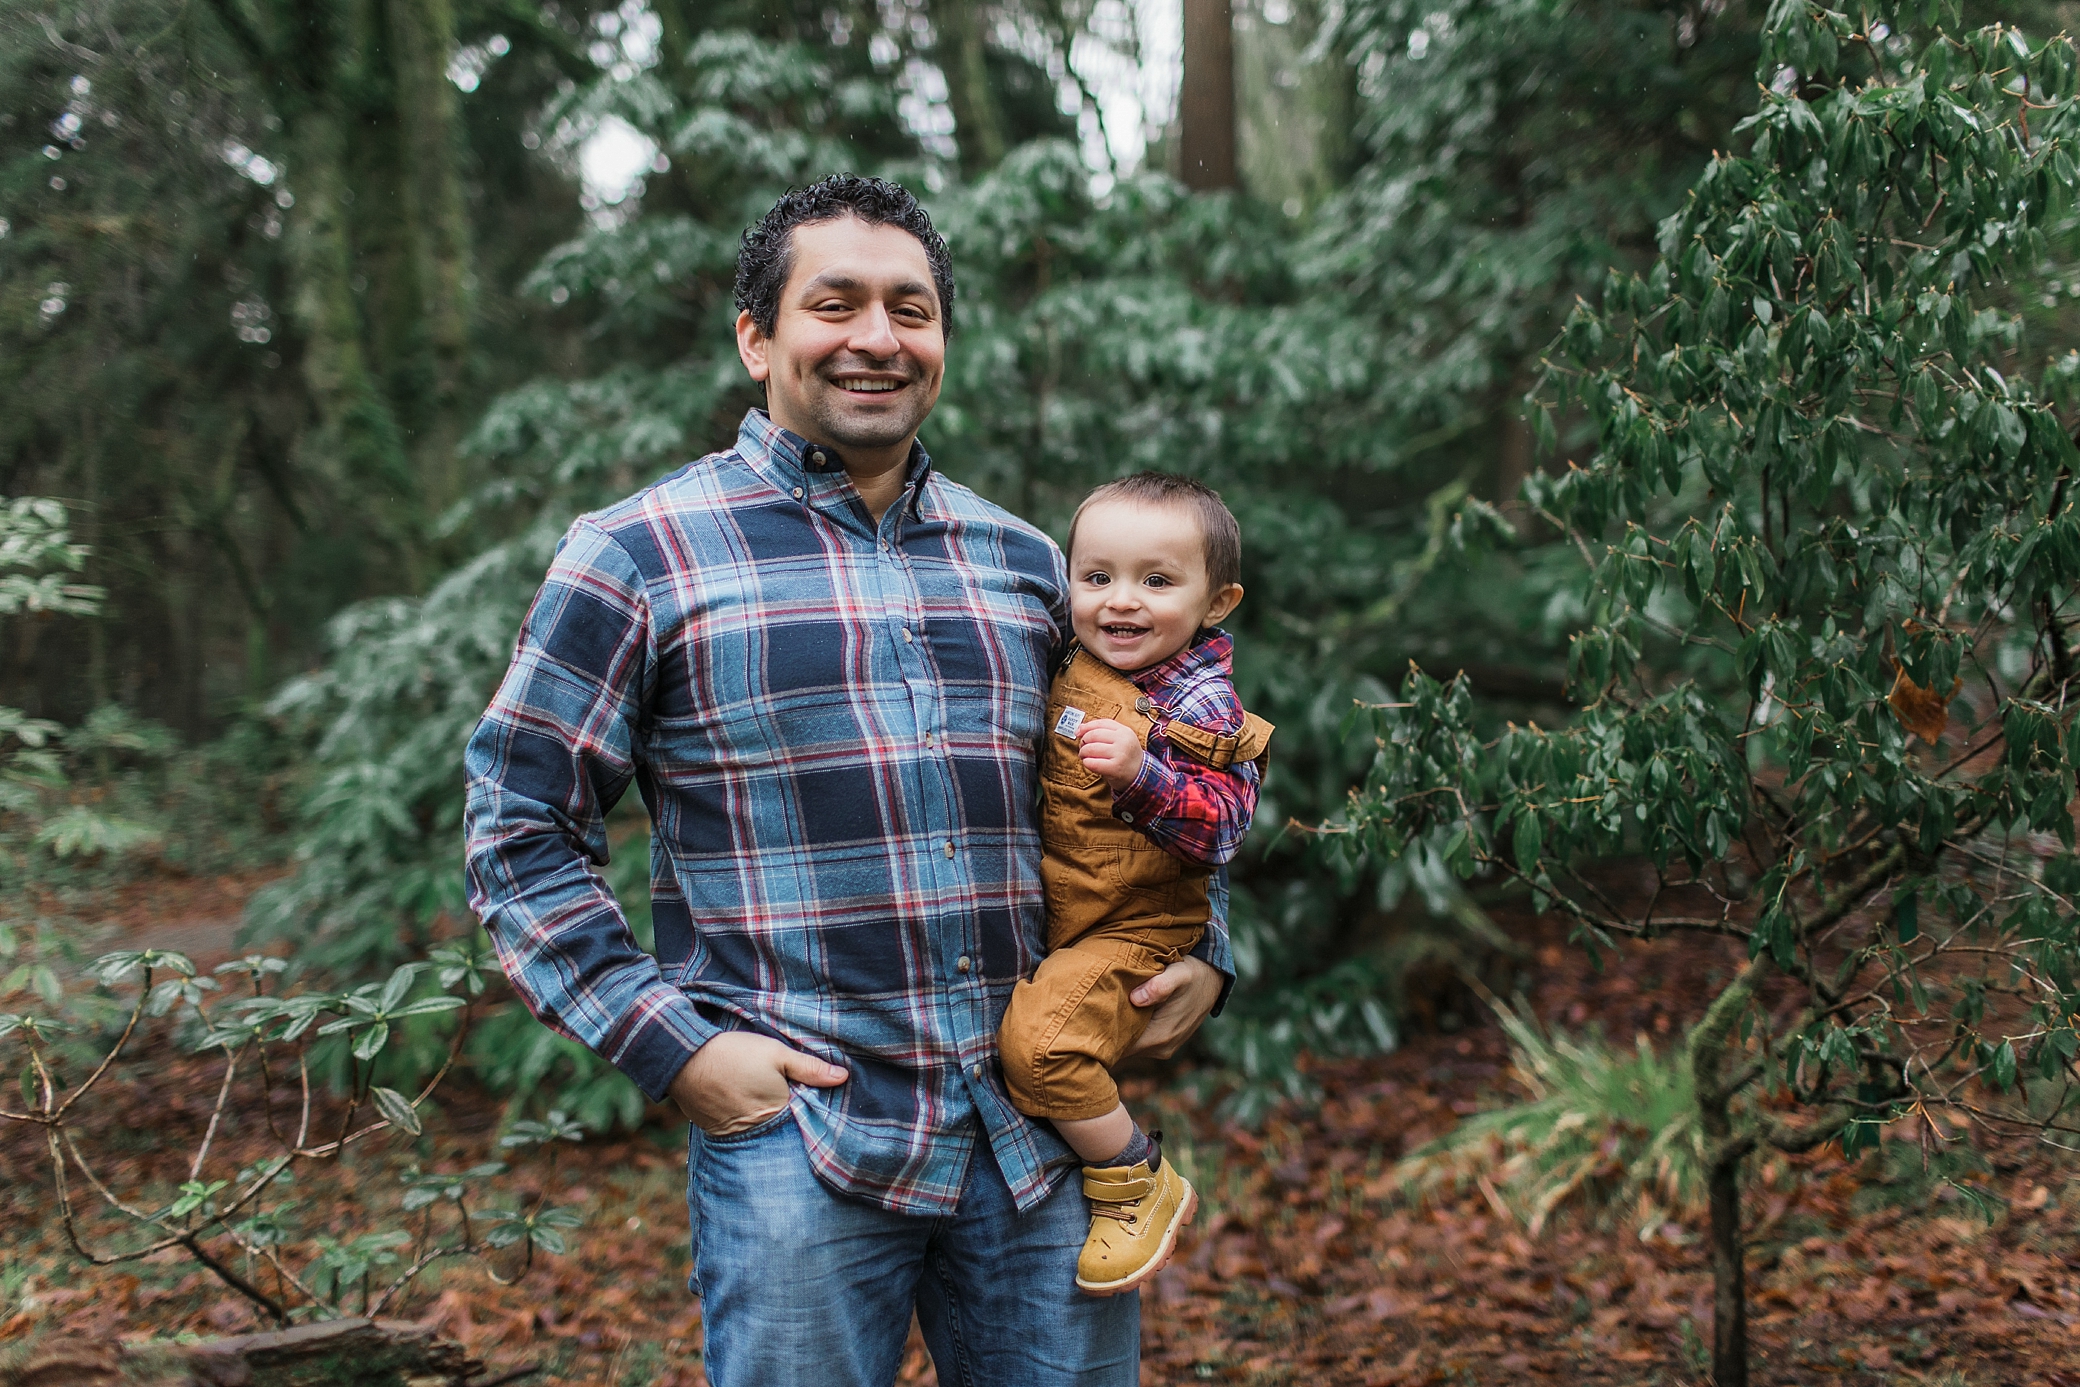 Son with his Dad during Photoshoot | Megan Montalvo Photography 